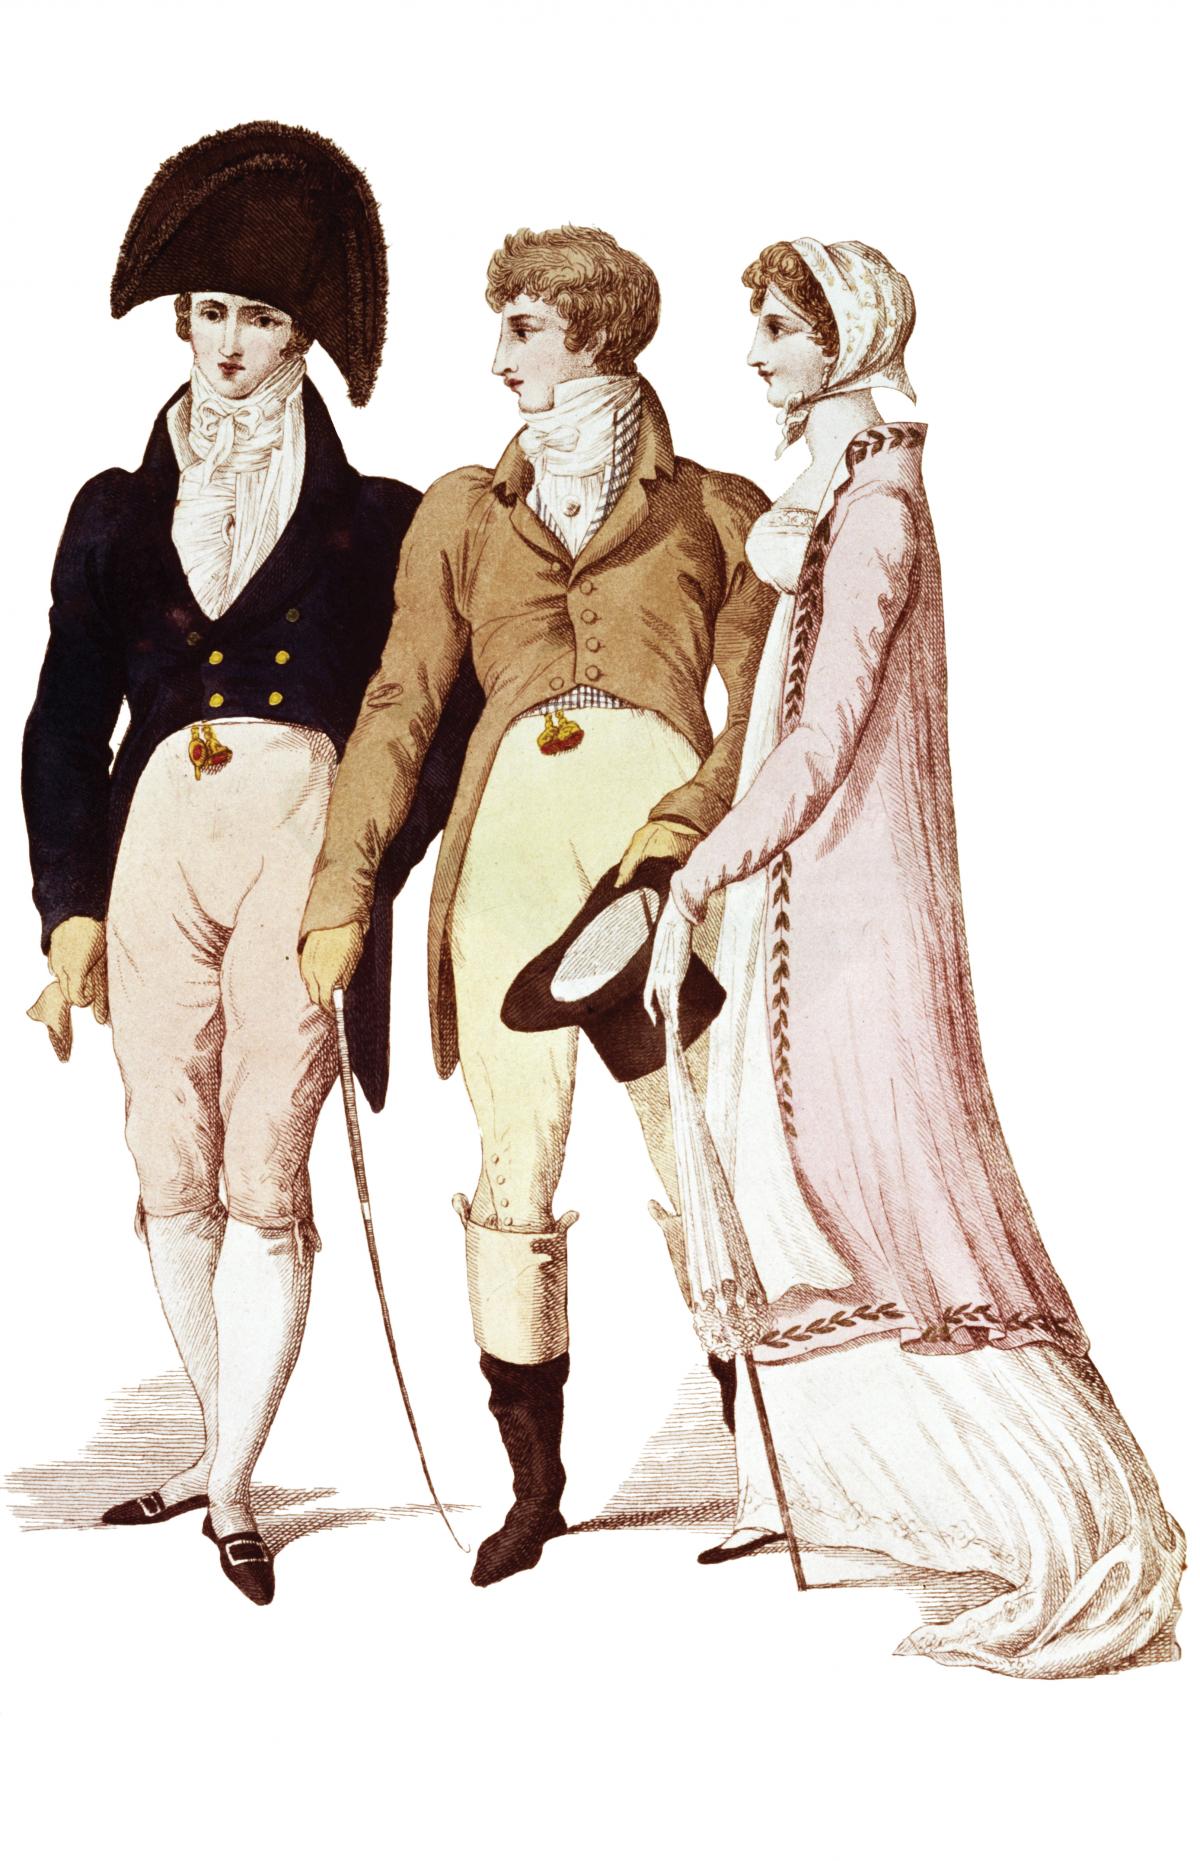 a naval officer in a cornered hat and dark coat, a wealthy man in a tan coat and white trousers, and a woman in a pink shawl, white dress, and matching bonnet